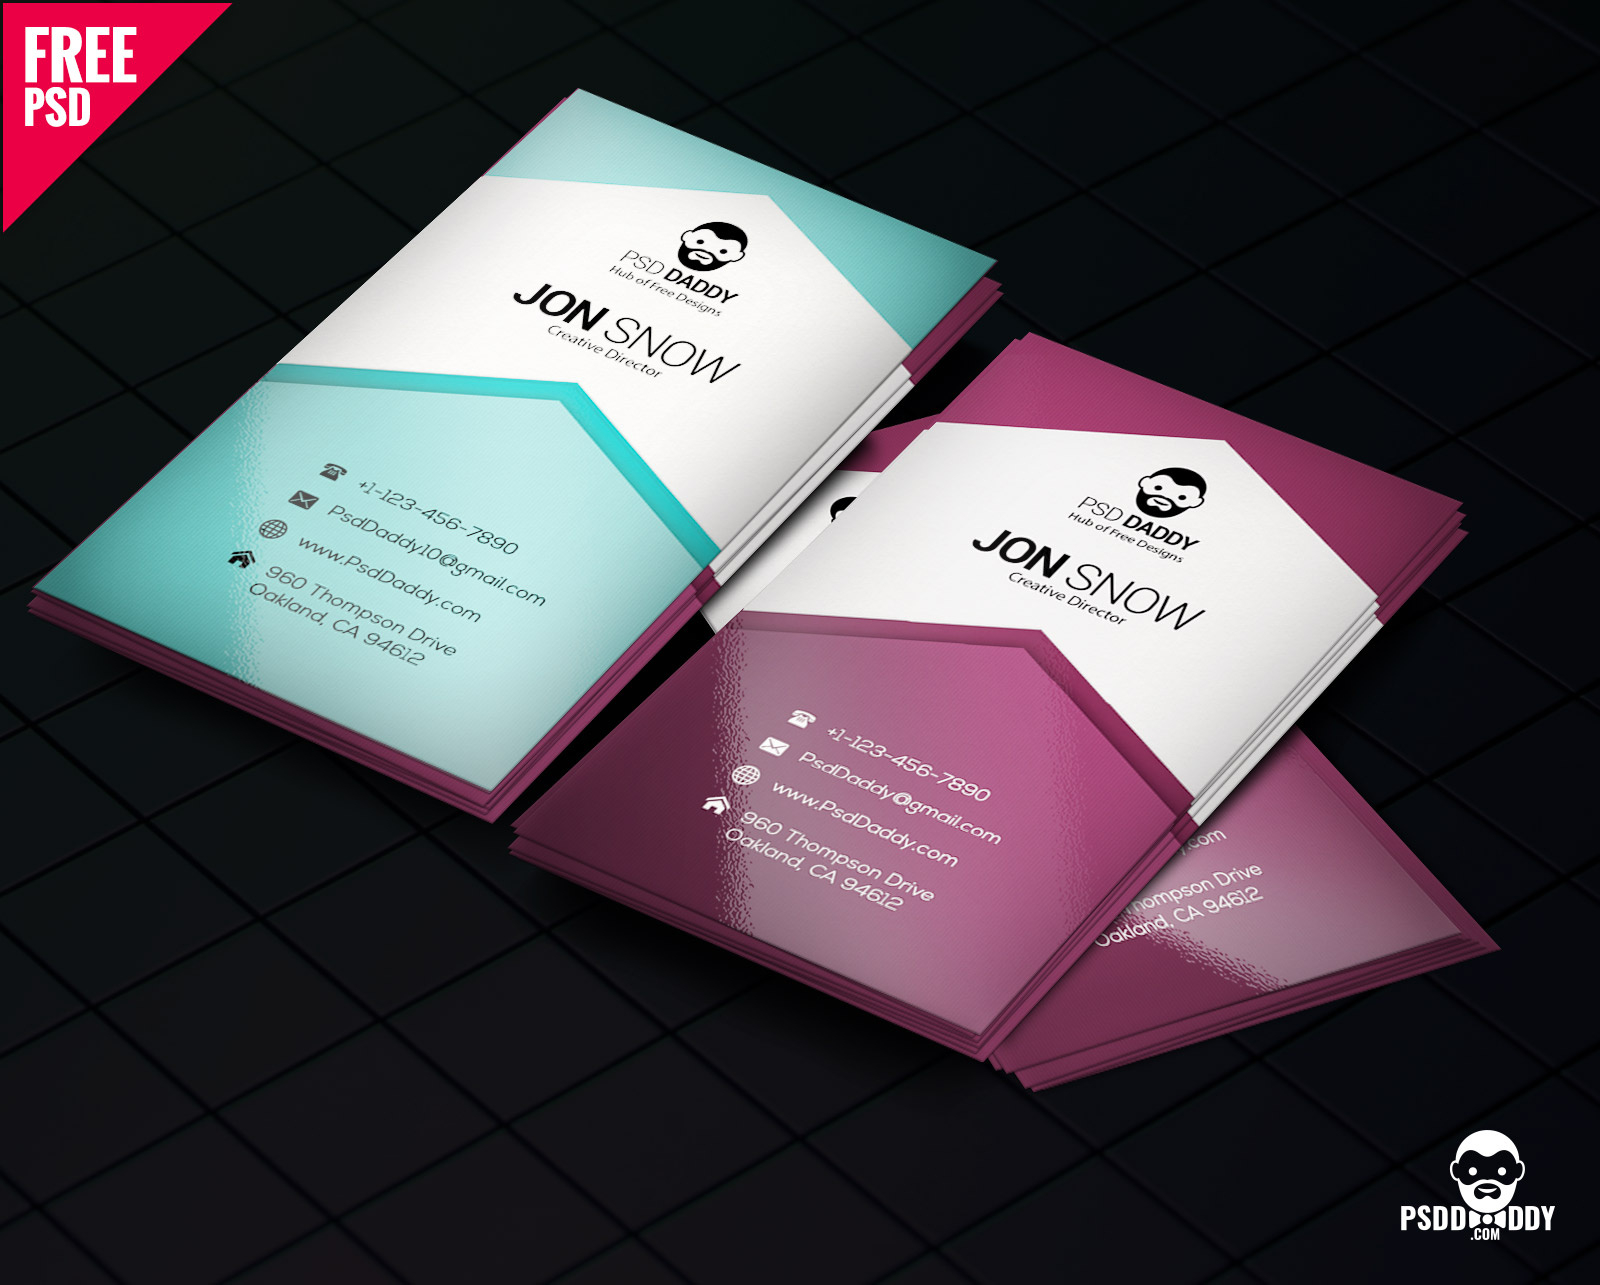 Downloadcreative Business Card Psd Free Psddaddy With Regard To Photoshop Cs6 Business Card Template